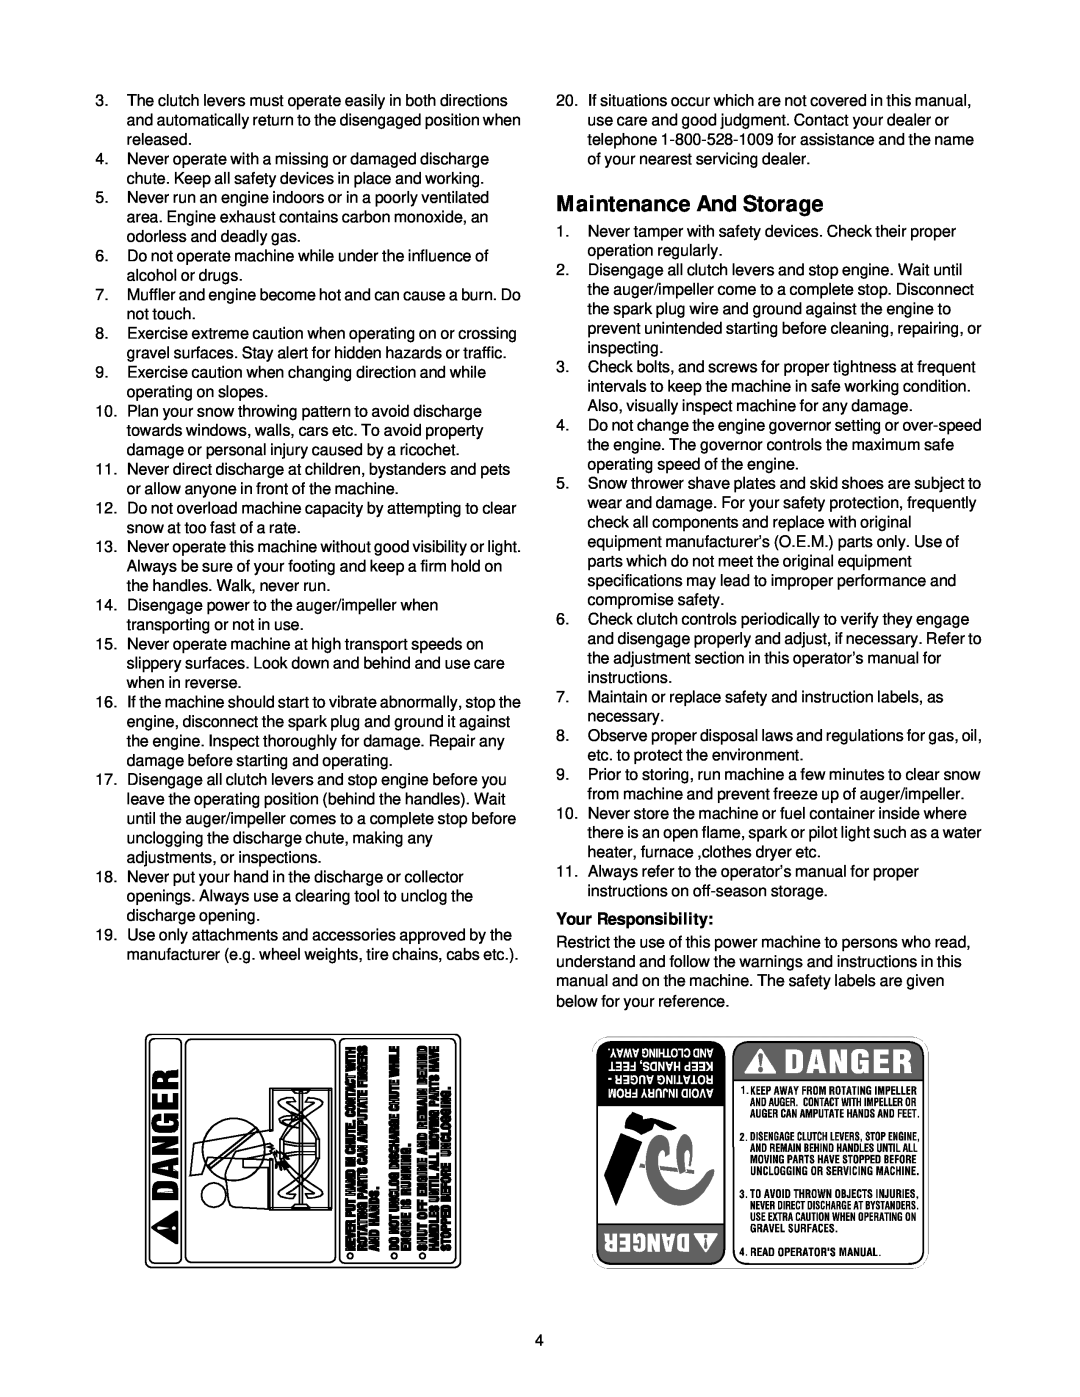 Cub Cadet 850 SWE manual Maintenance And Storage, Your Responsibility 